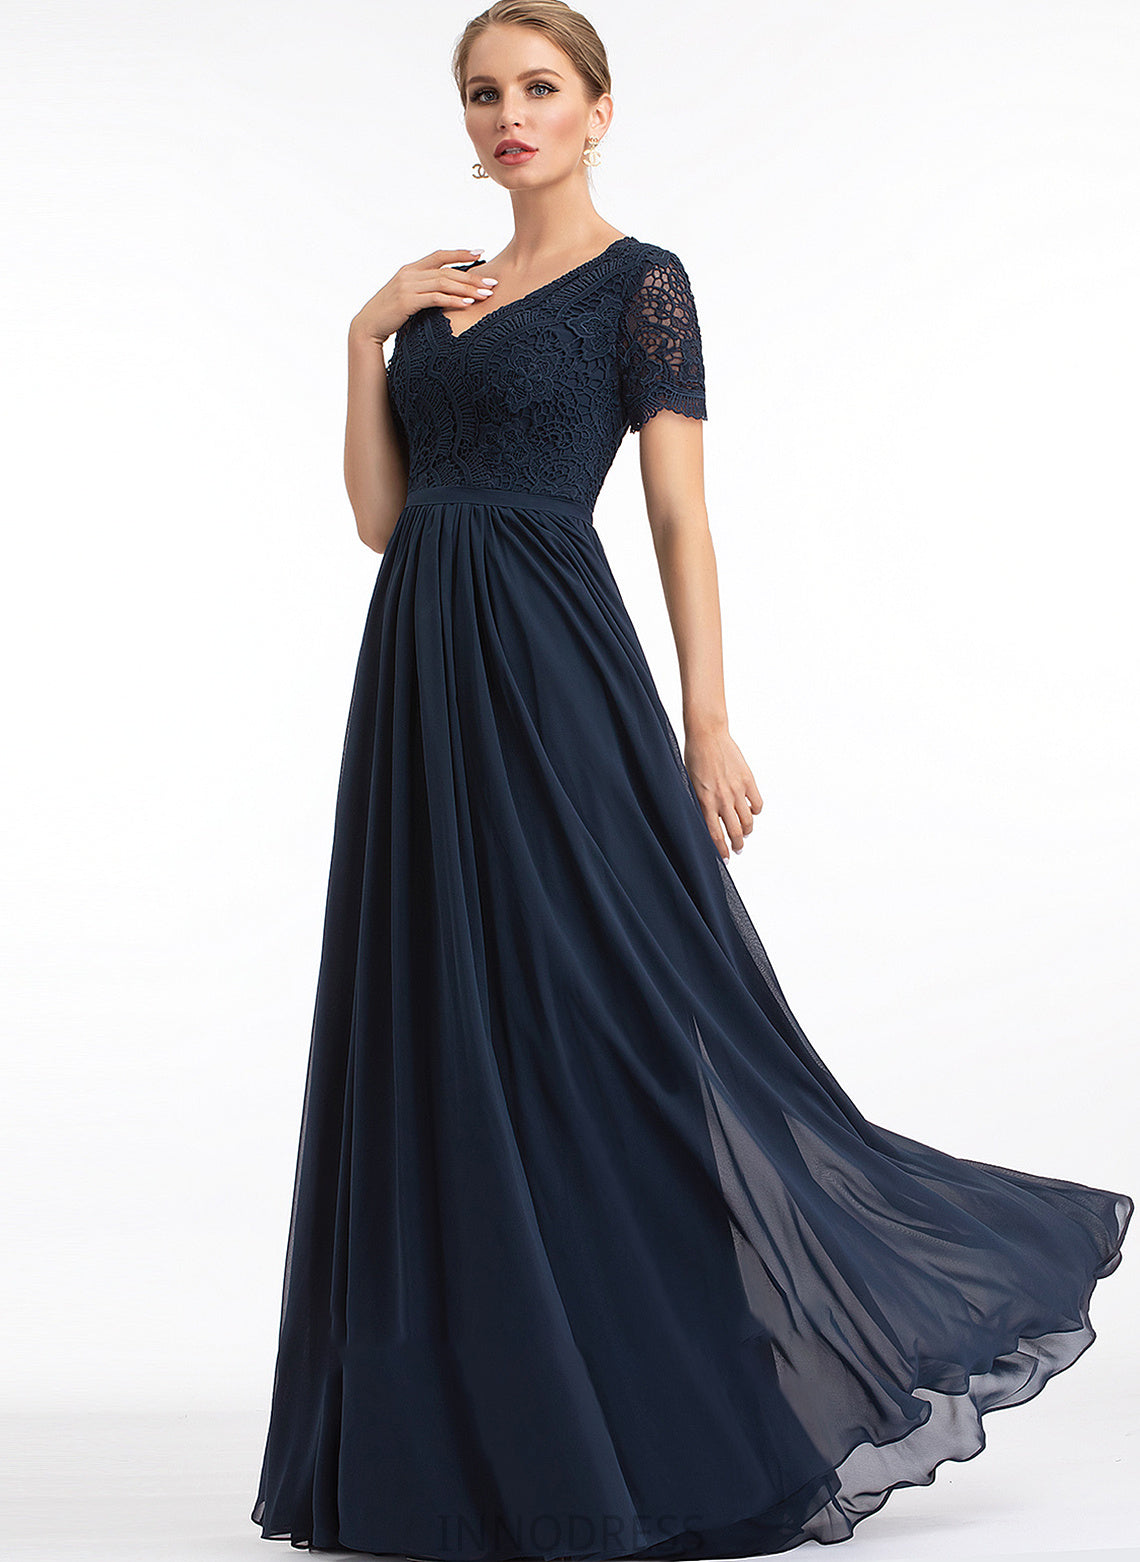 V-neck Fabric Lace Floor-Length Length Silhouette Neckline Sleeve A-Line Angel Spaghetti Staps Off The Shoulder